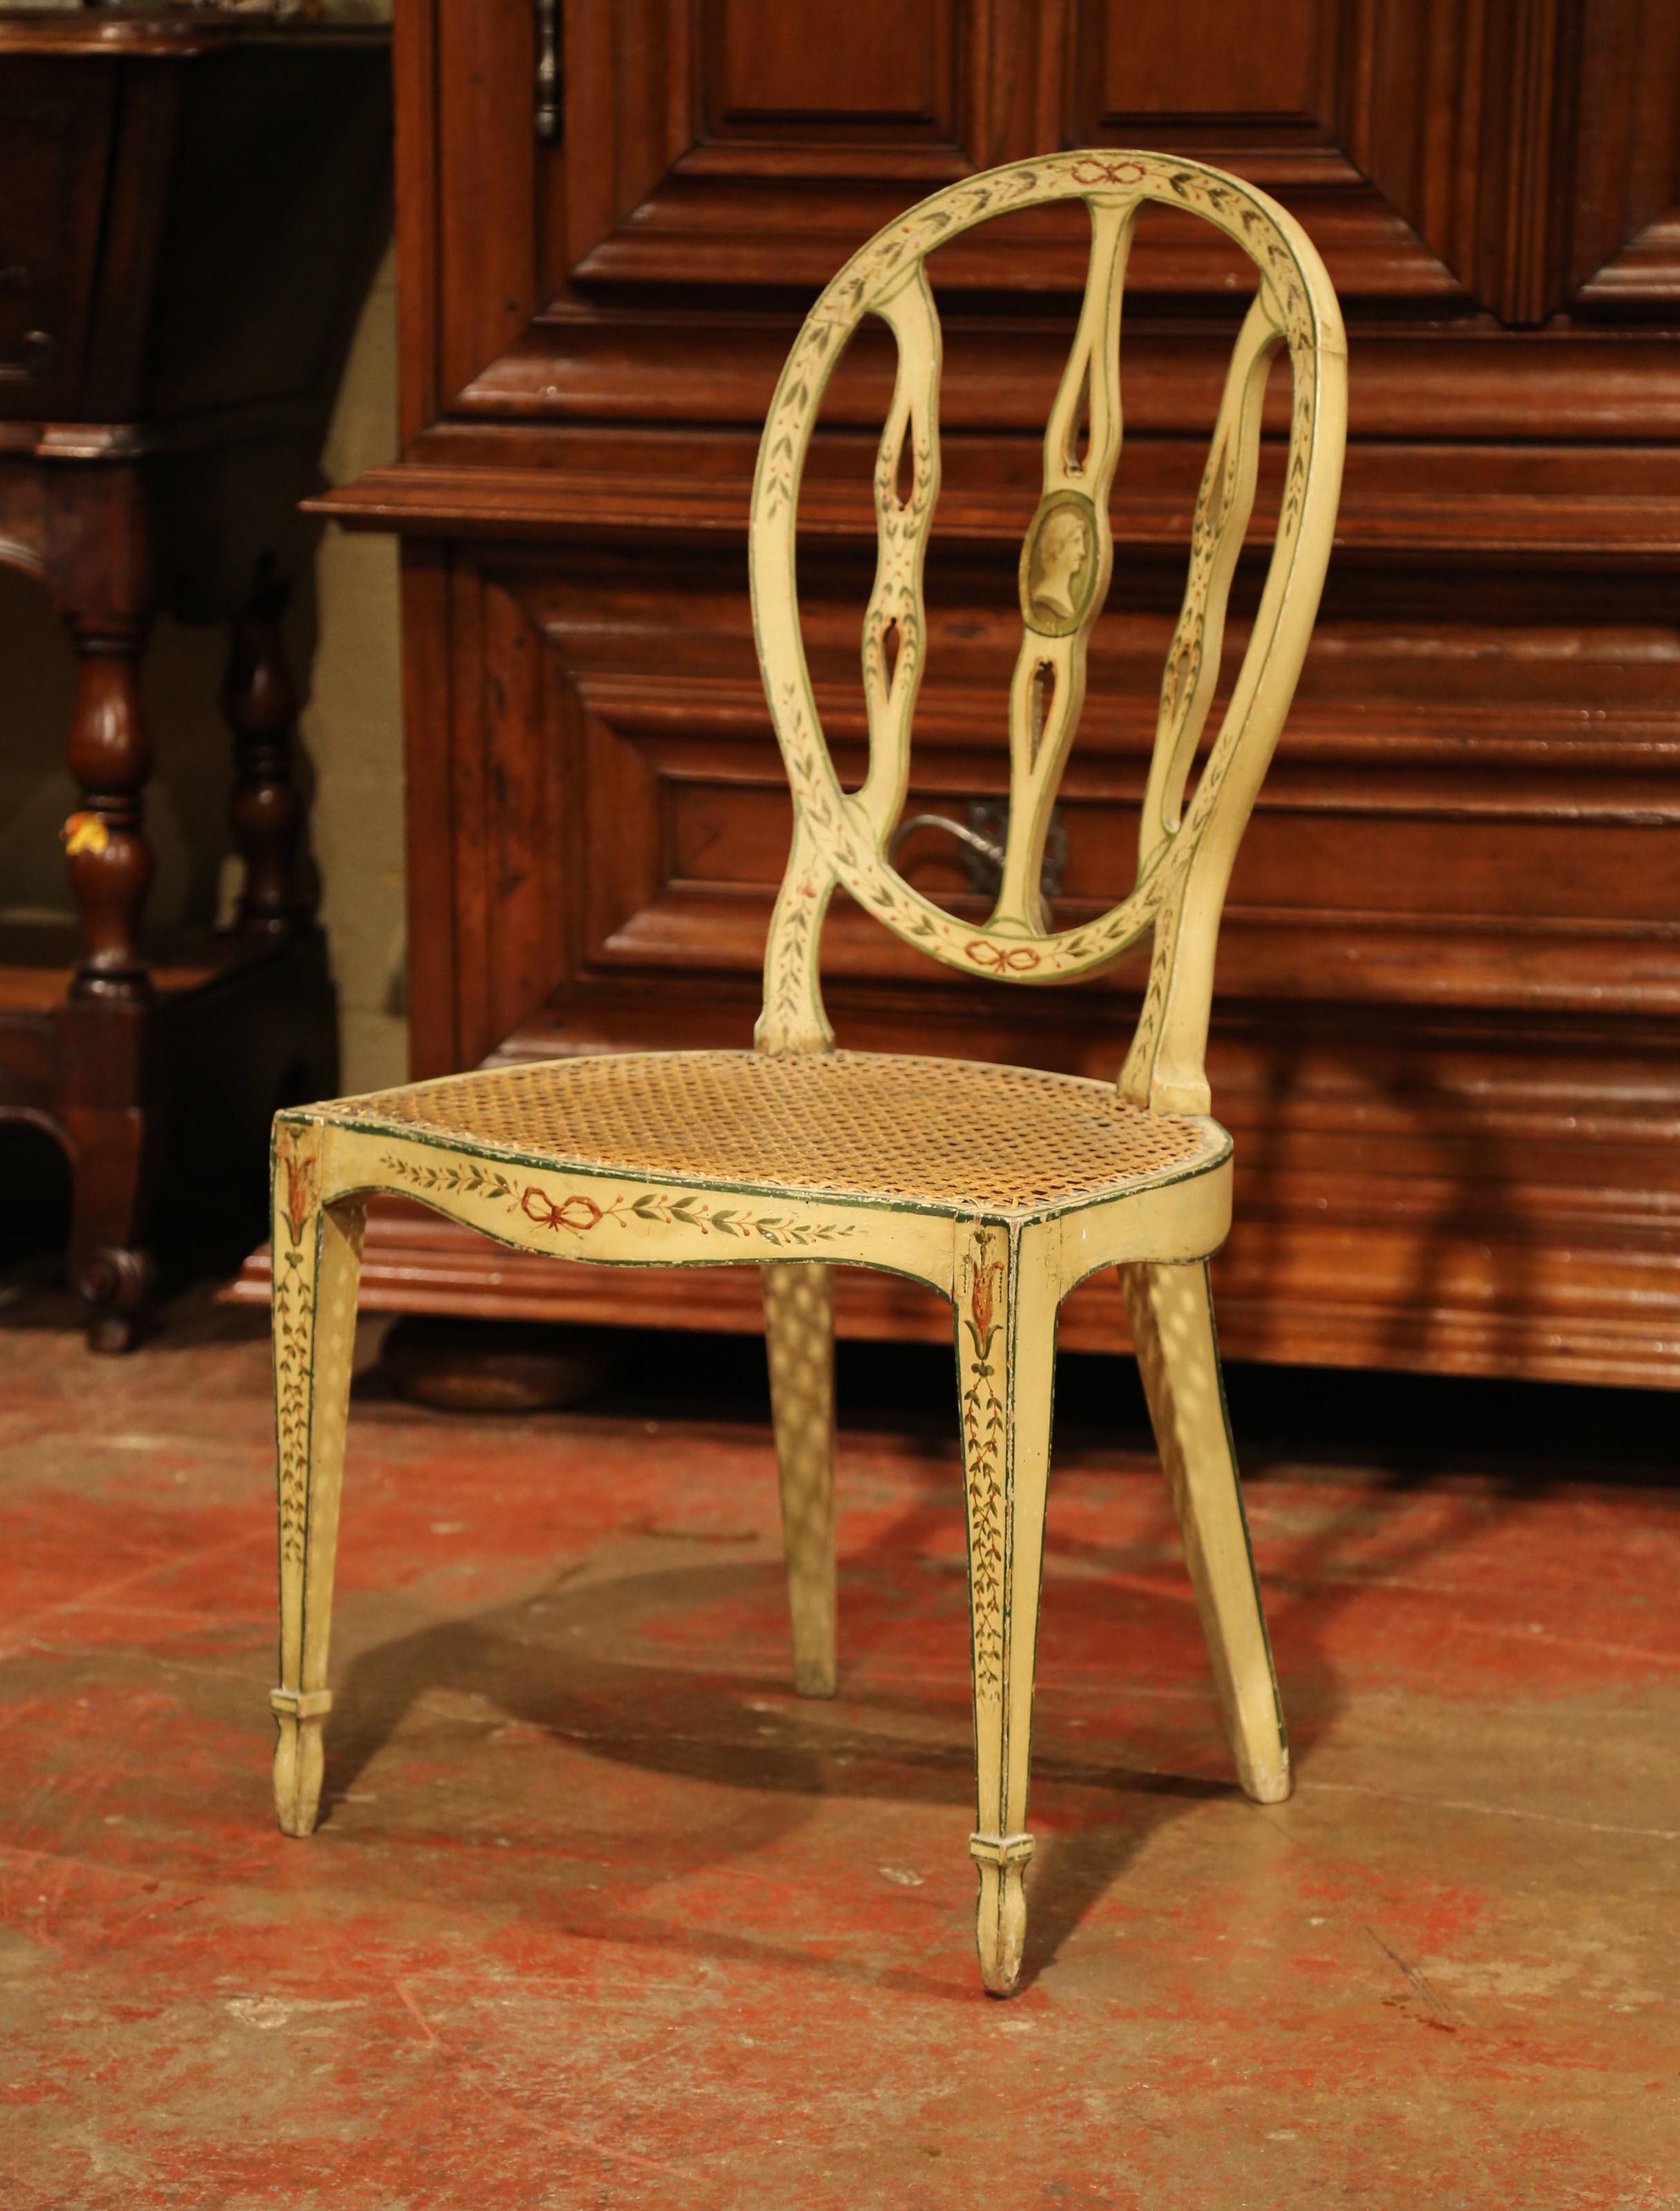 Set of Four Mid-19th Century Hepplewhite Style Painted Chairs with Cane Seat 1